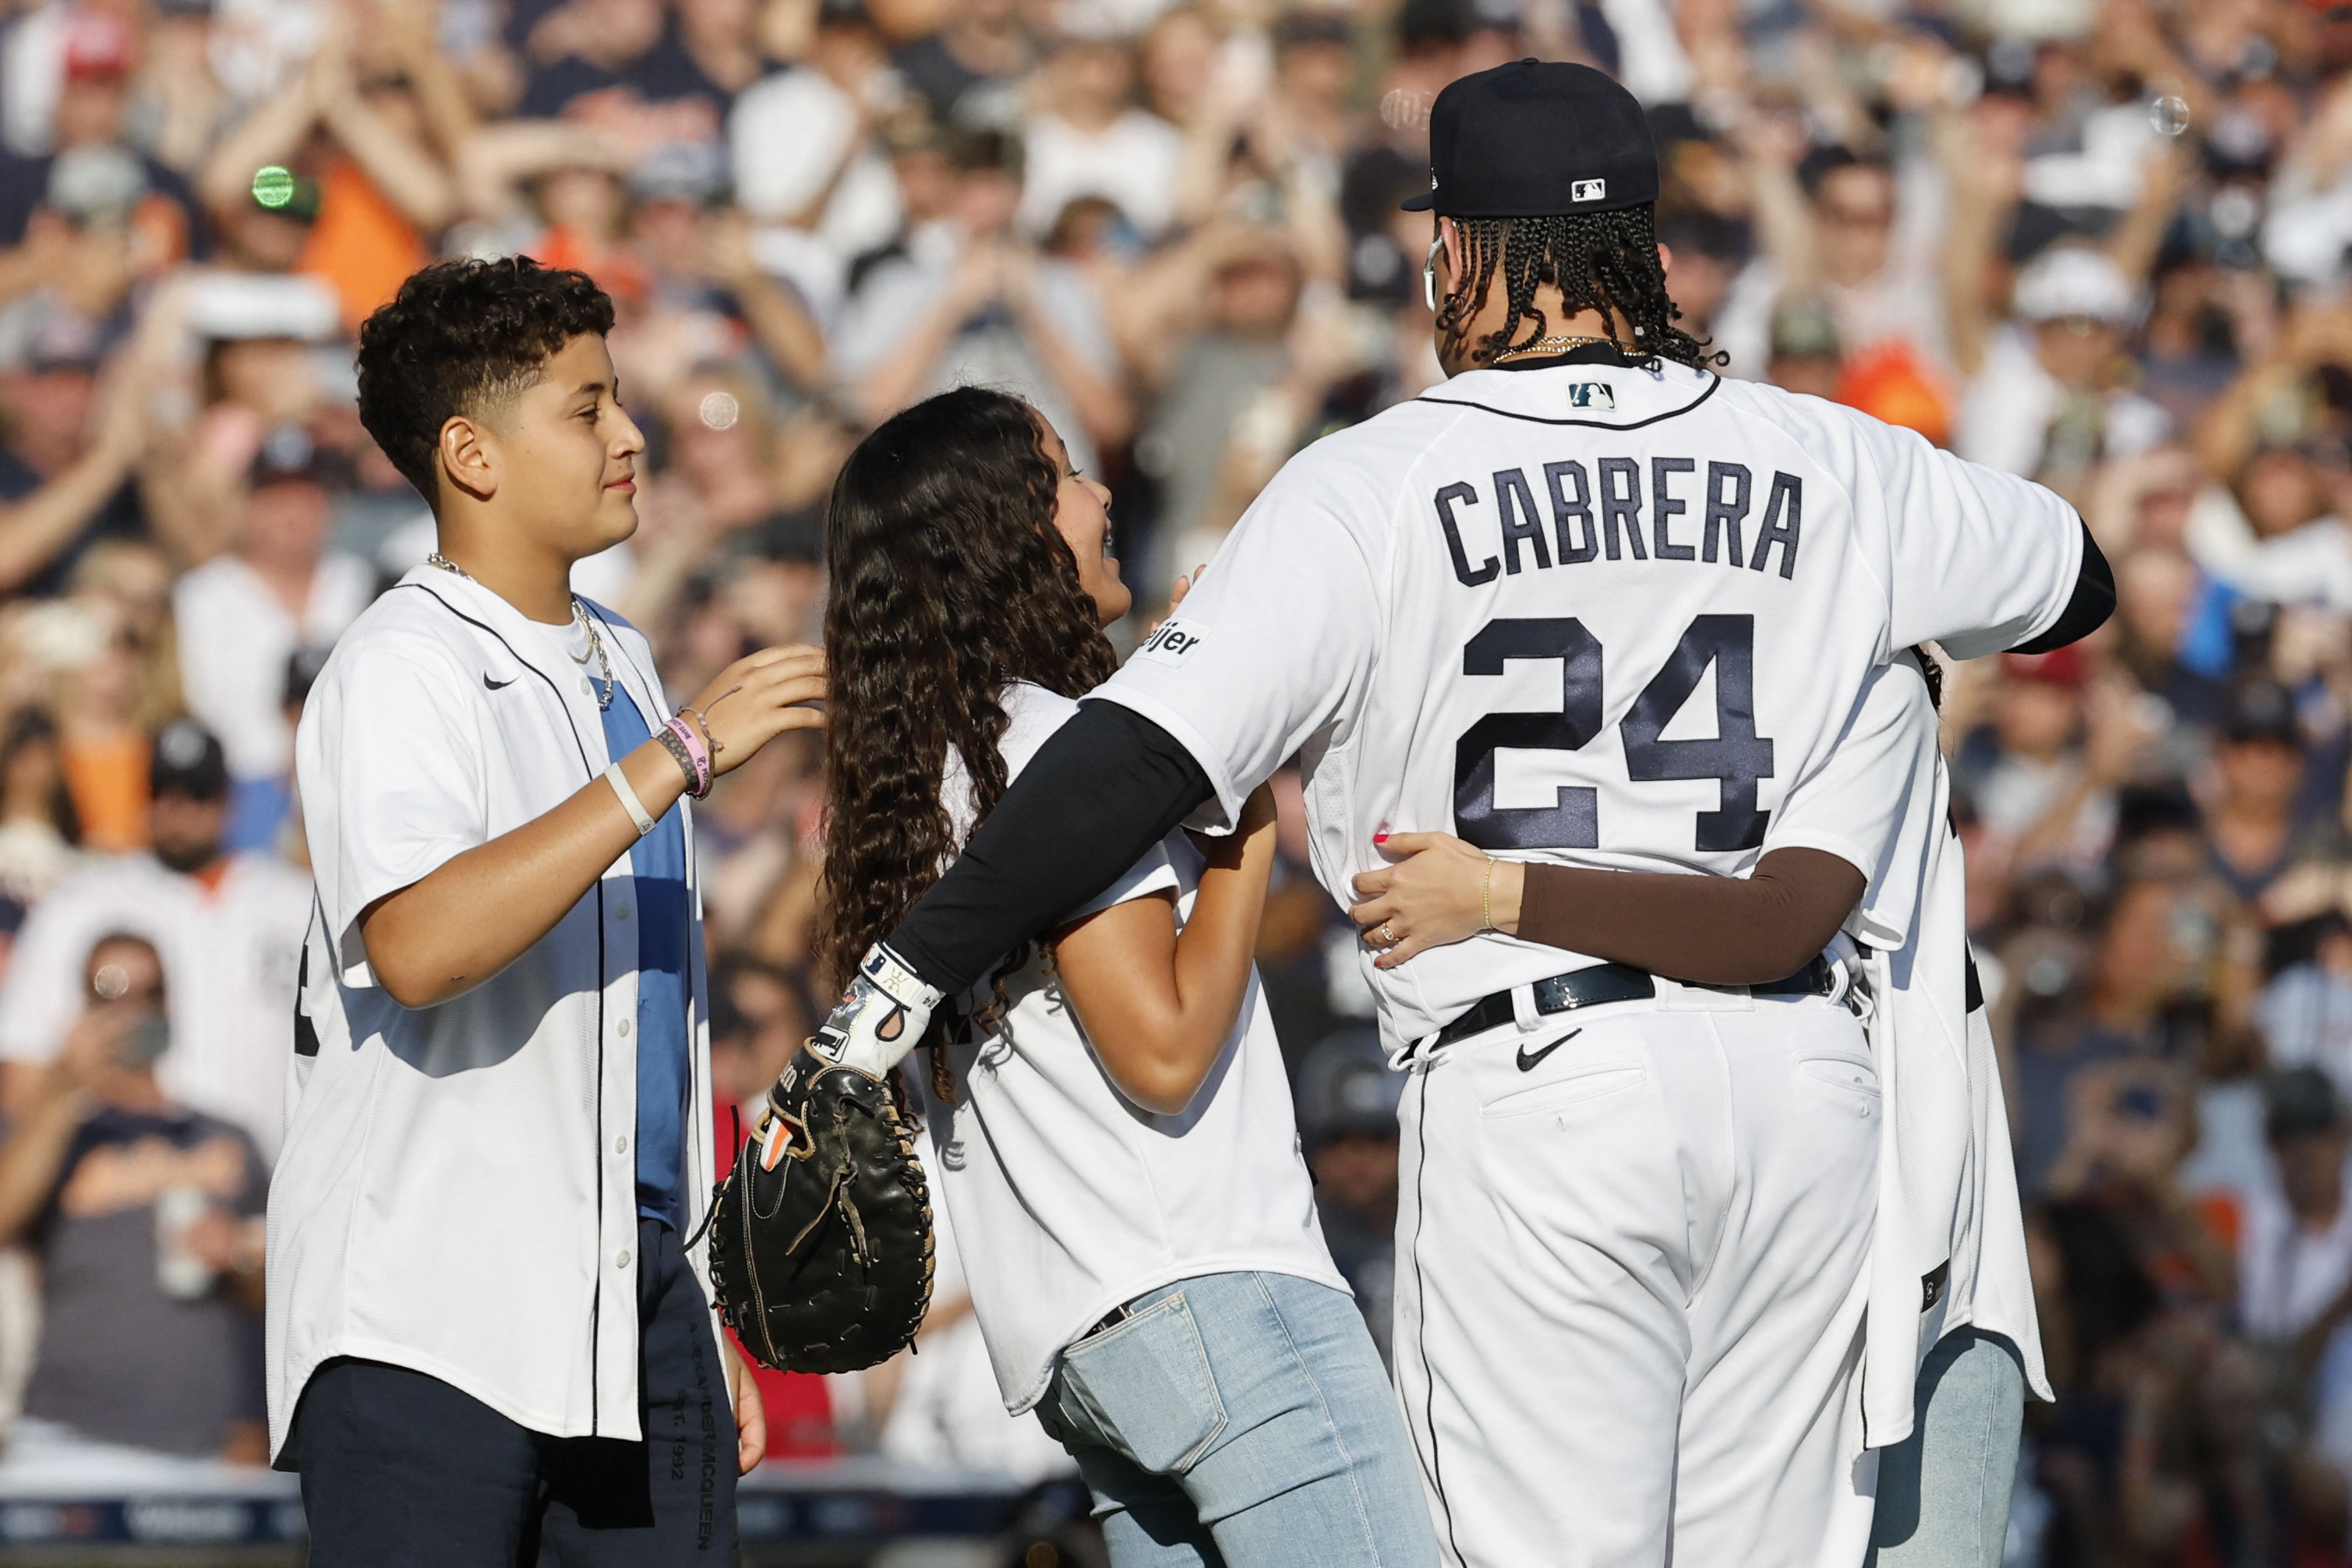 Tigers top Guardians in Miguel Cabrera's final game - Field Level Media -  Professional sports content solutions